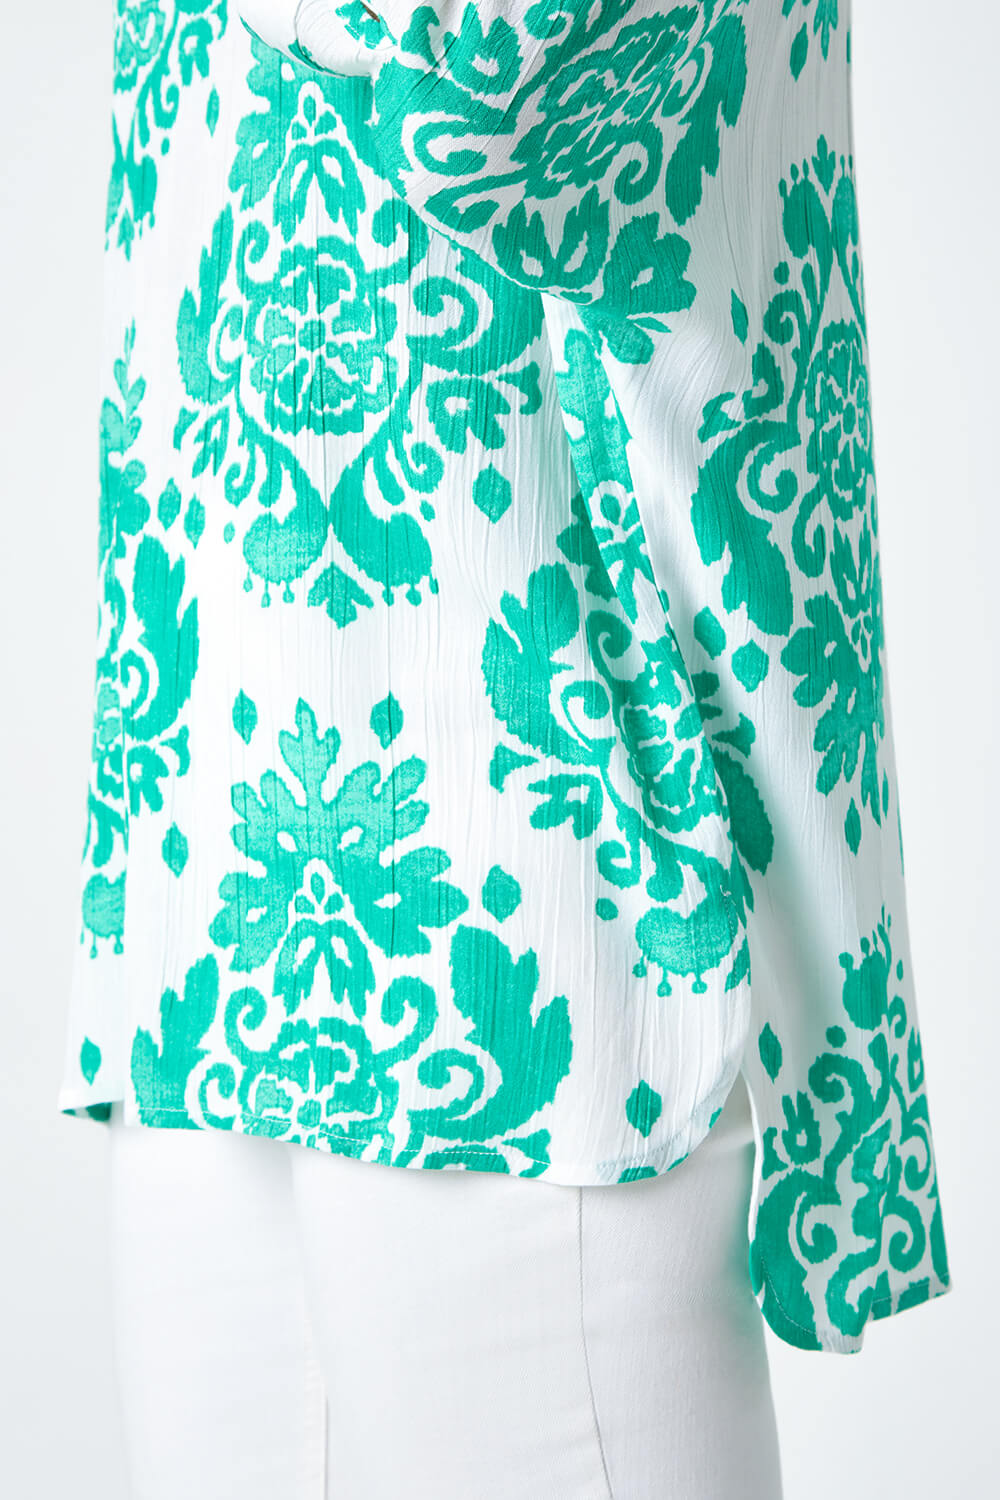 Green Textured Paisley Print Tunic Top, Image 5 of 5